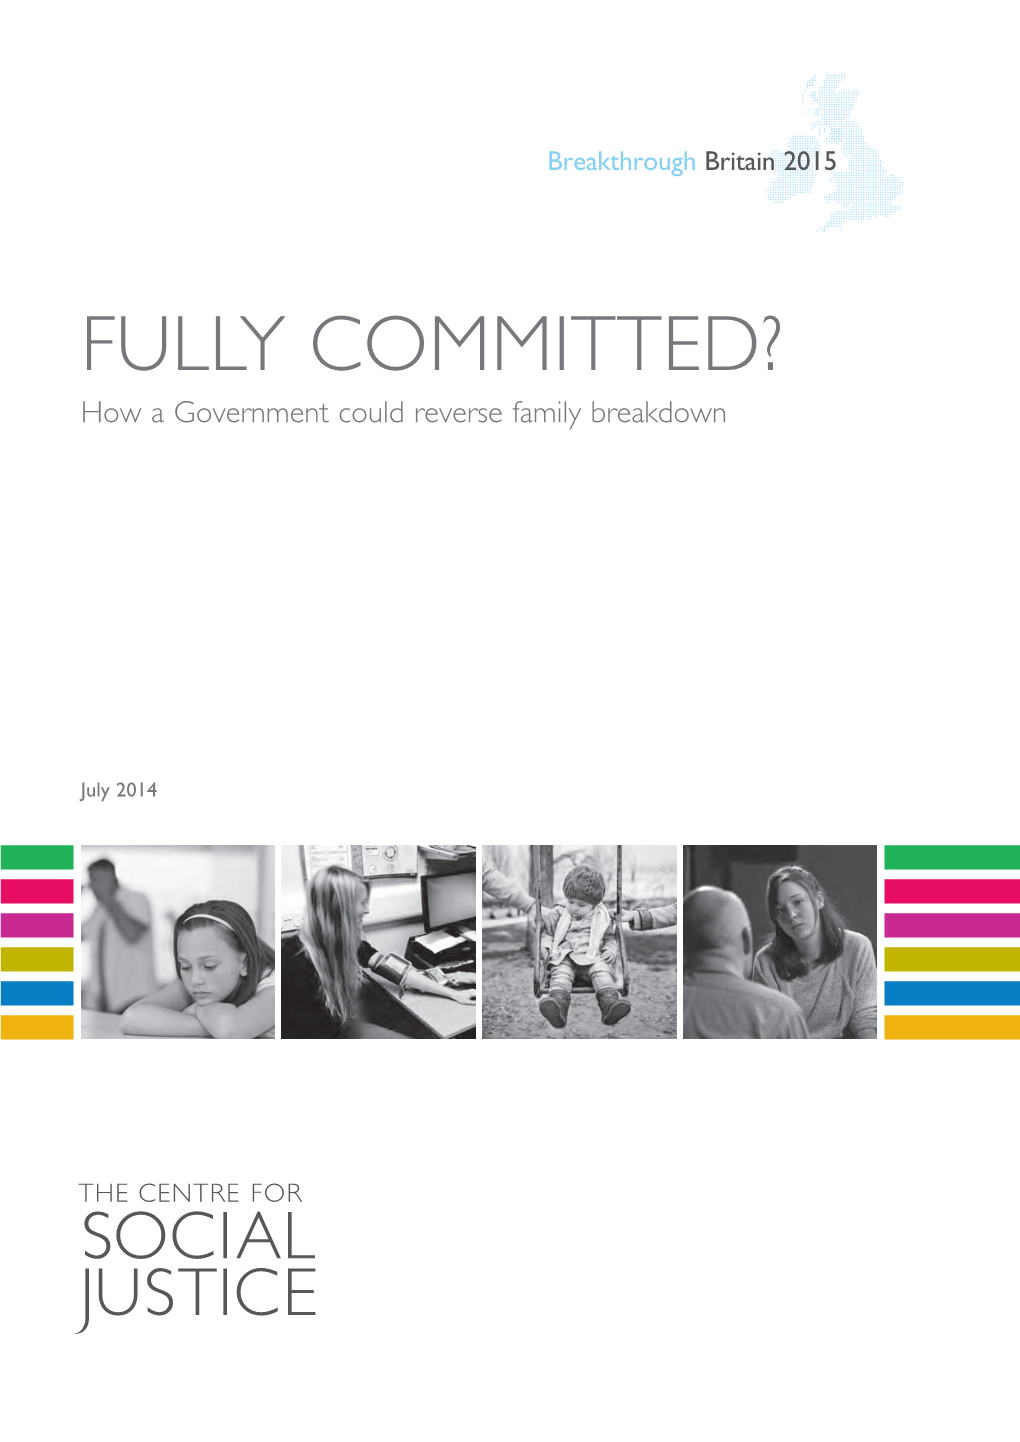 FULLY COMMITTED? How a Government Could Reverse Family Breakdown